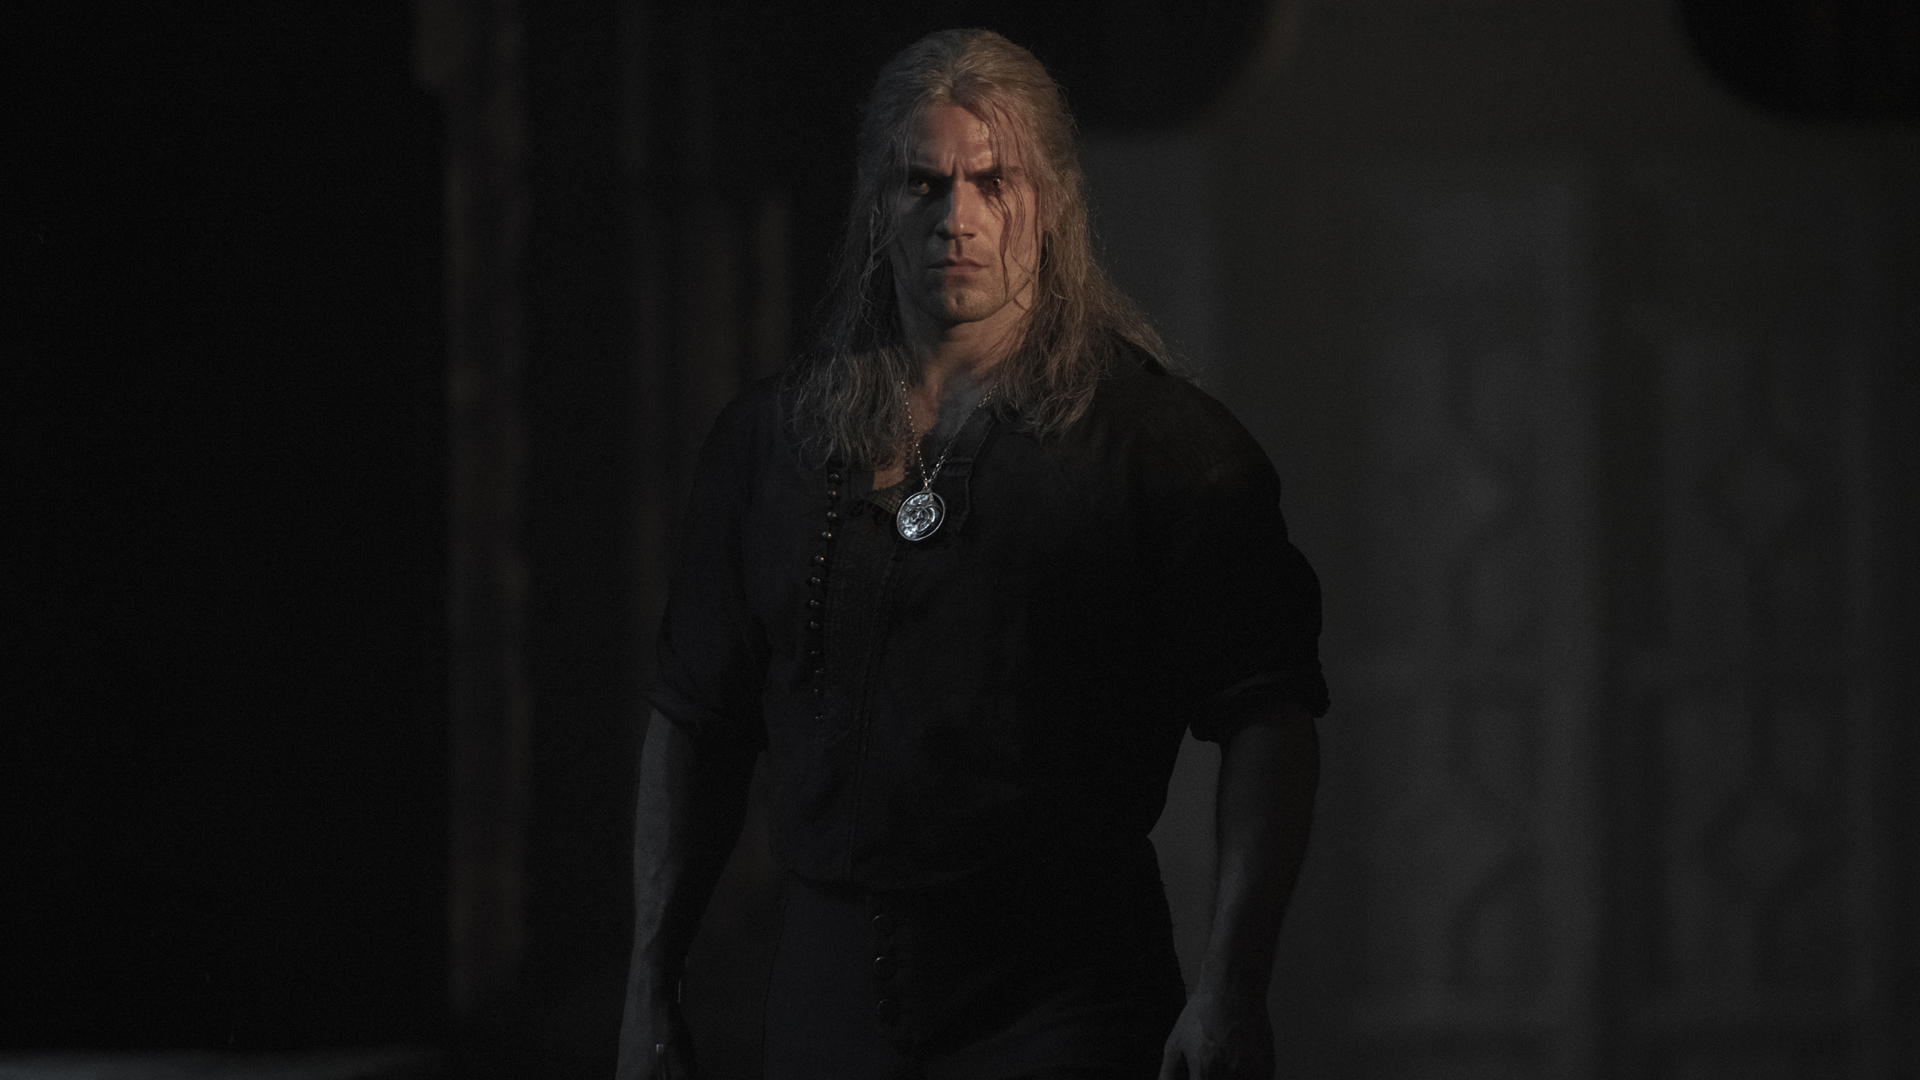 Geralt of Rivia stares menacingly into the camera in The Witcher season 2